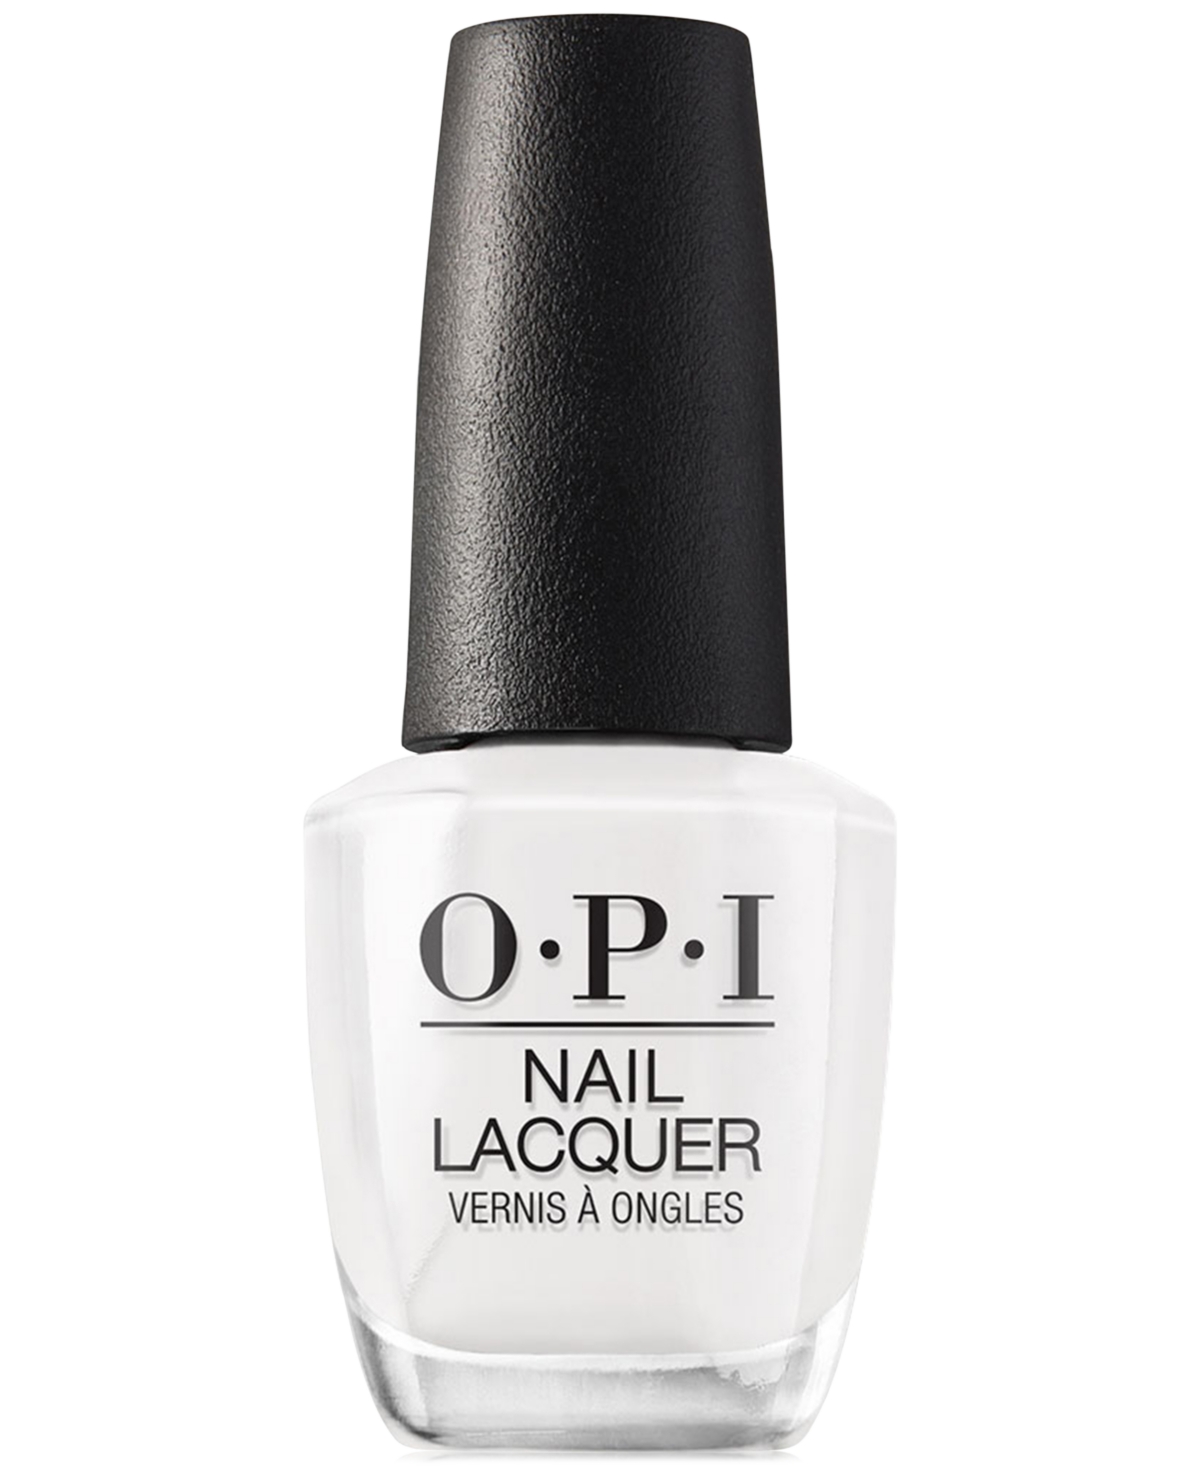 Opi Nail Lacquer In Alpine Snow